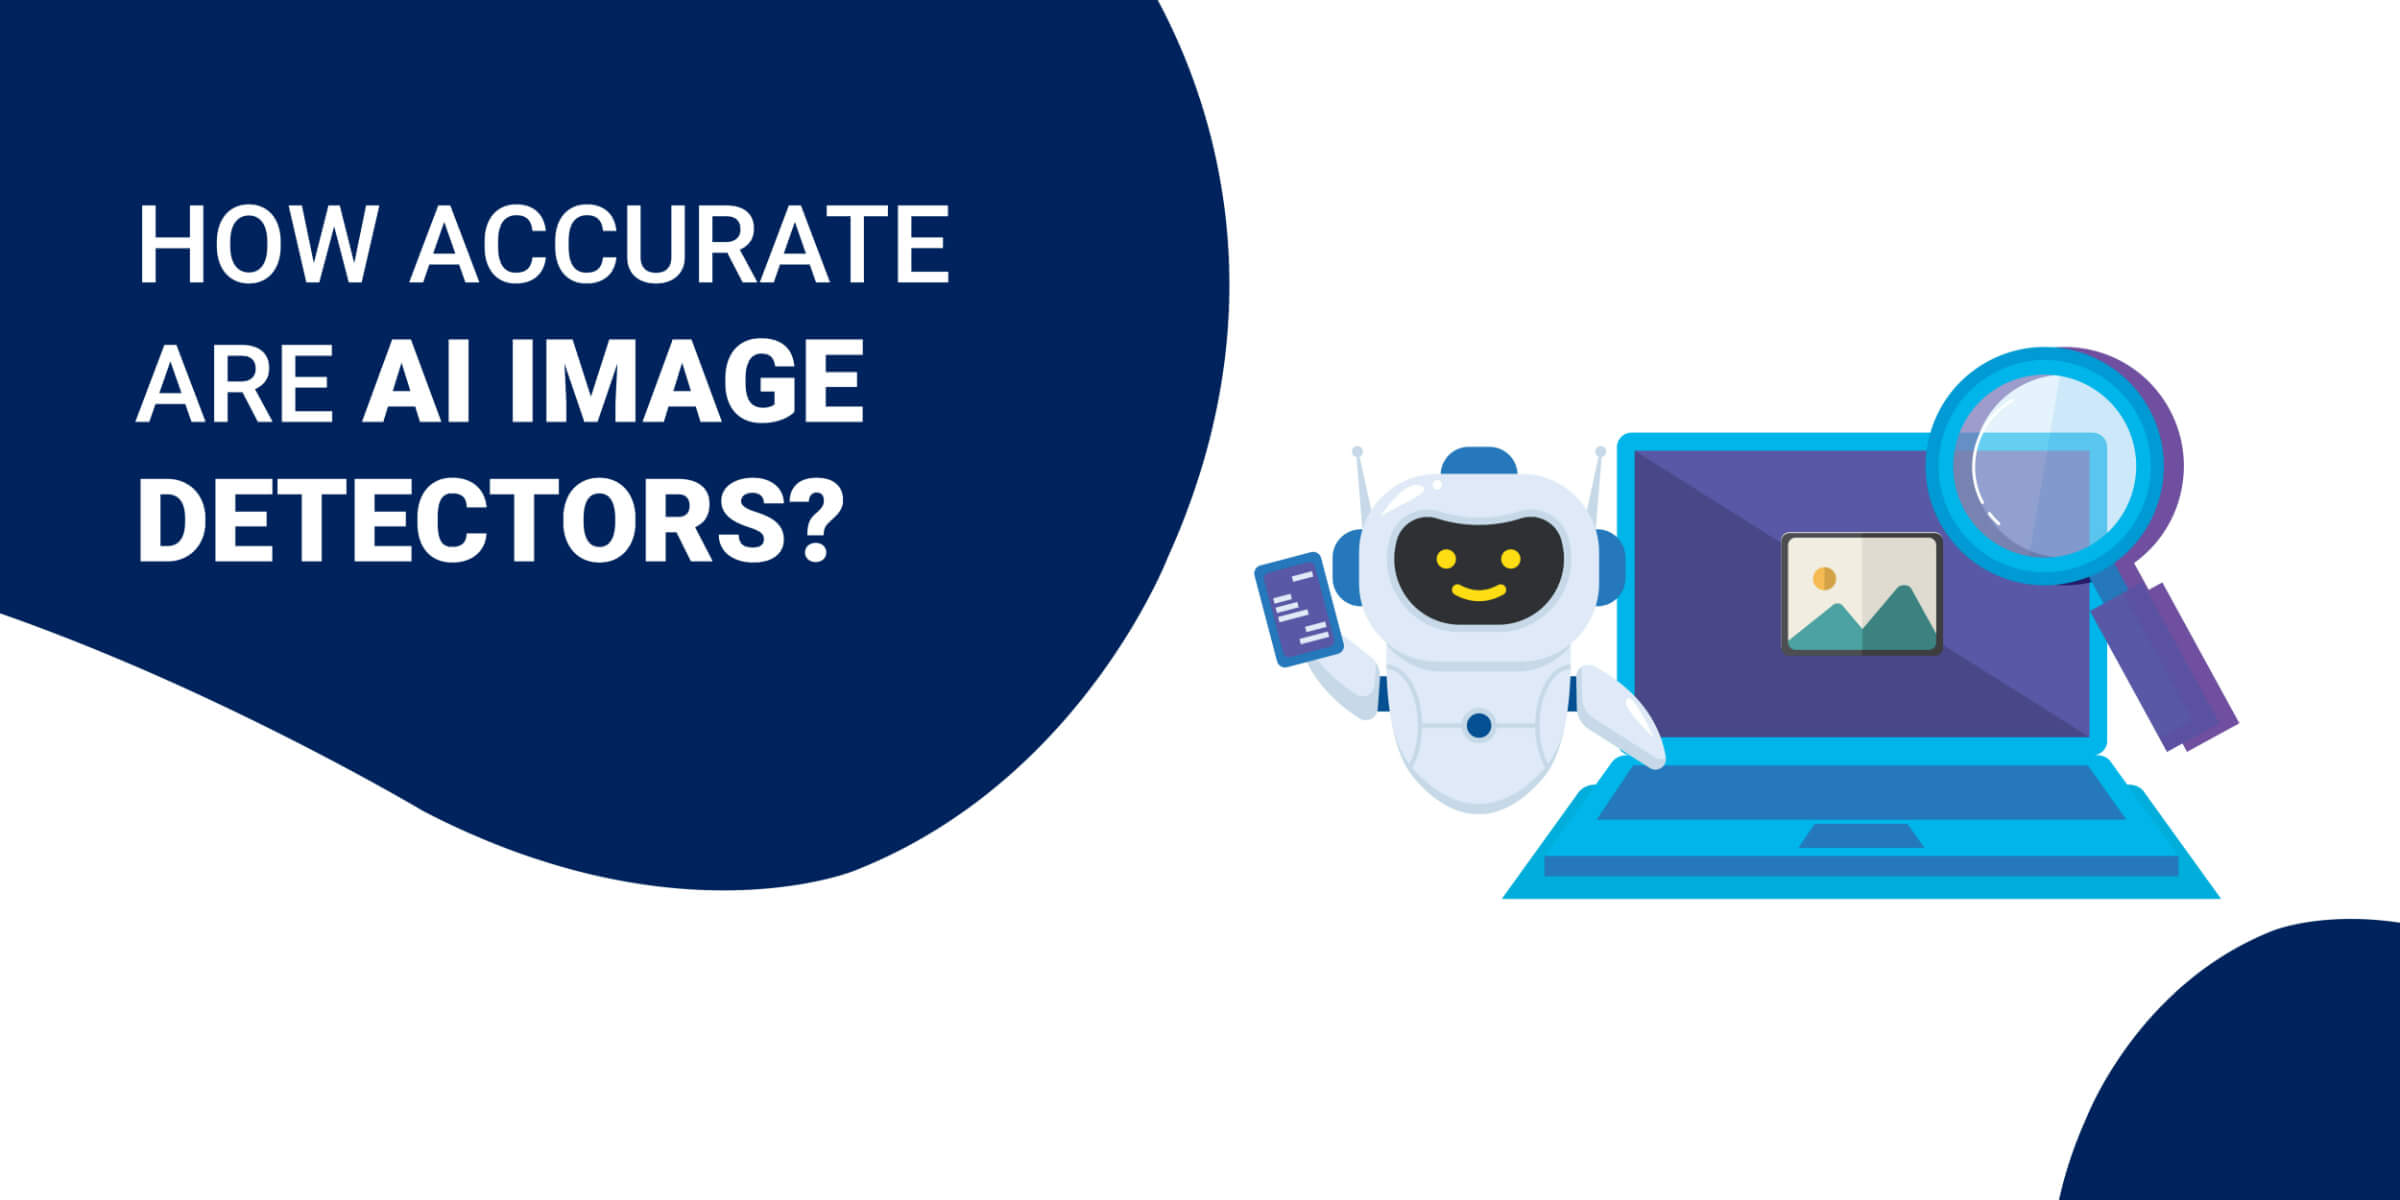 How Accurate Are AI Image Detectors